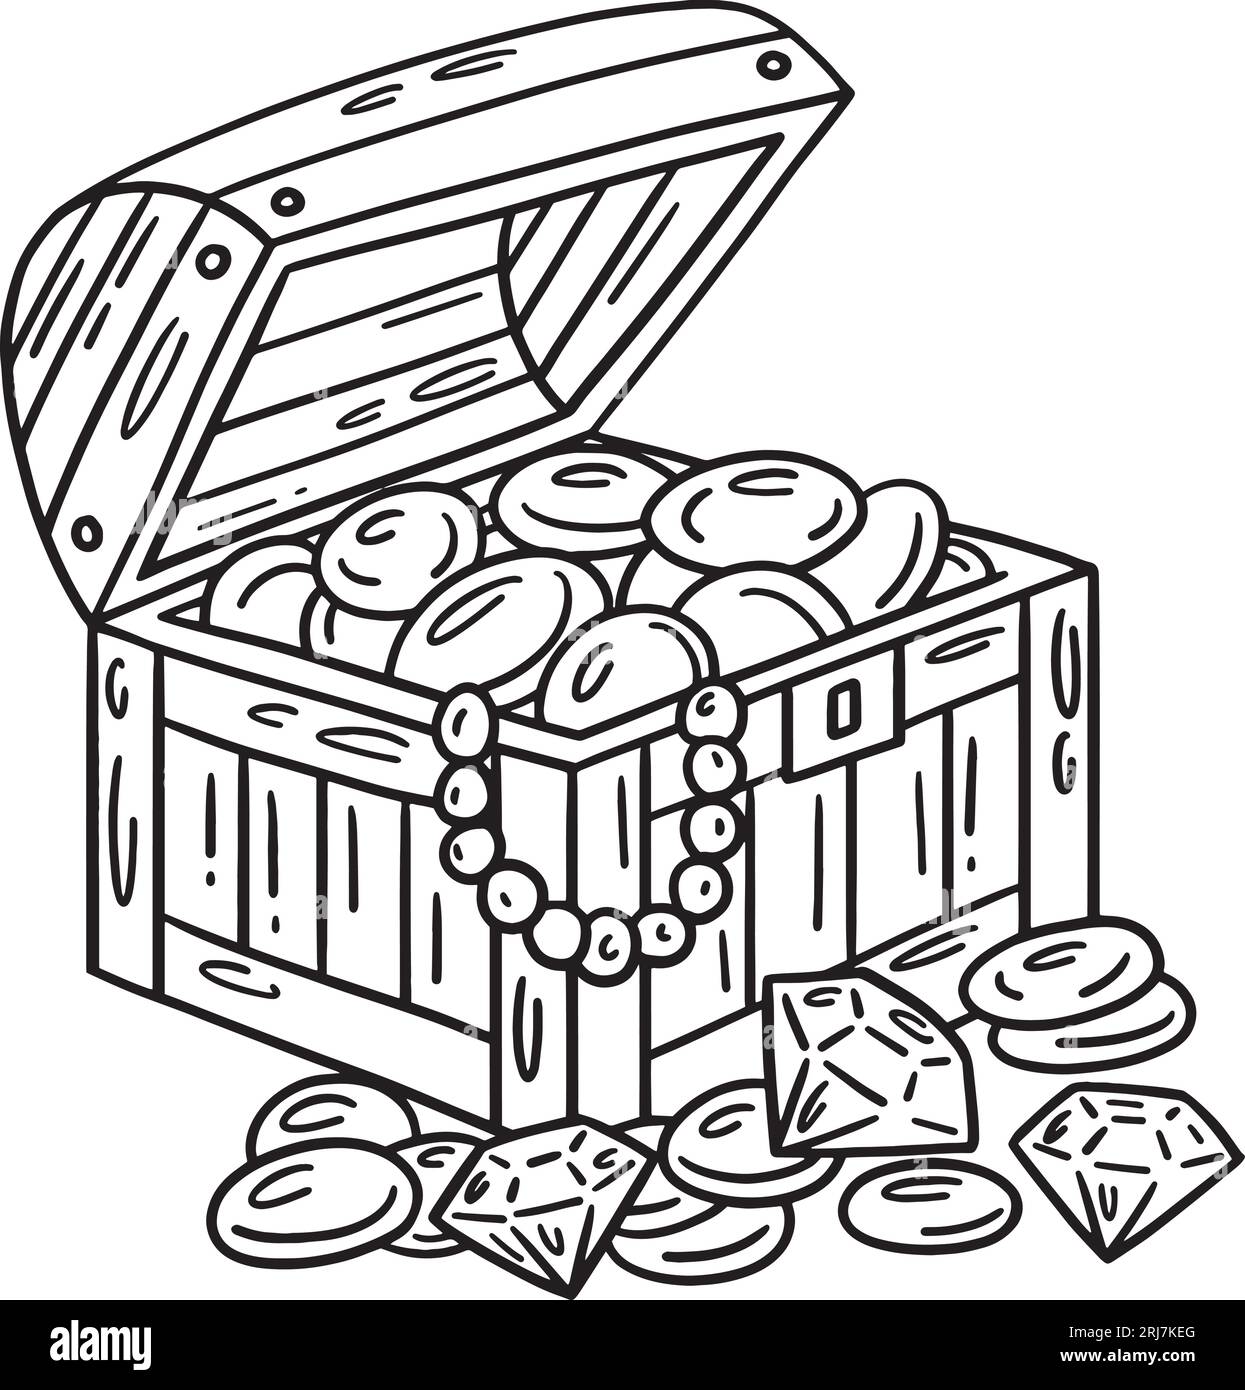 Pirate chests isolated coloring page for kids stock vector image art